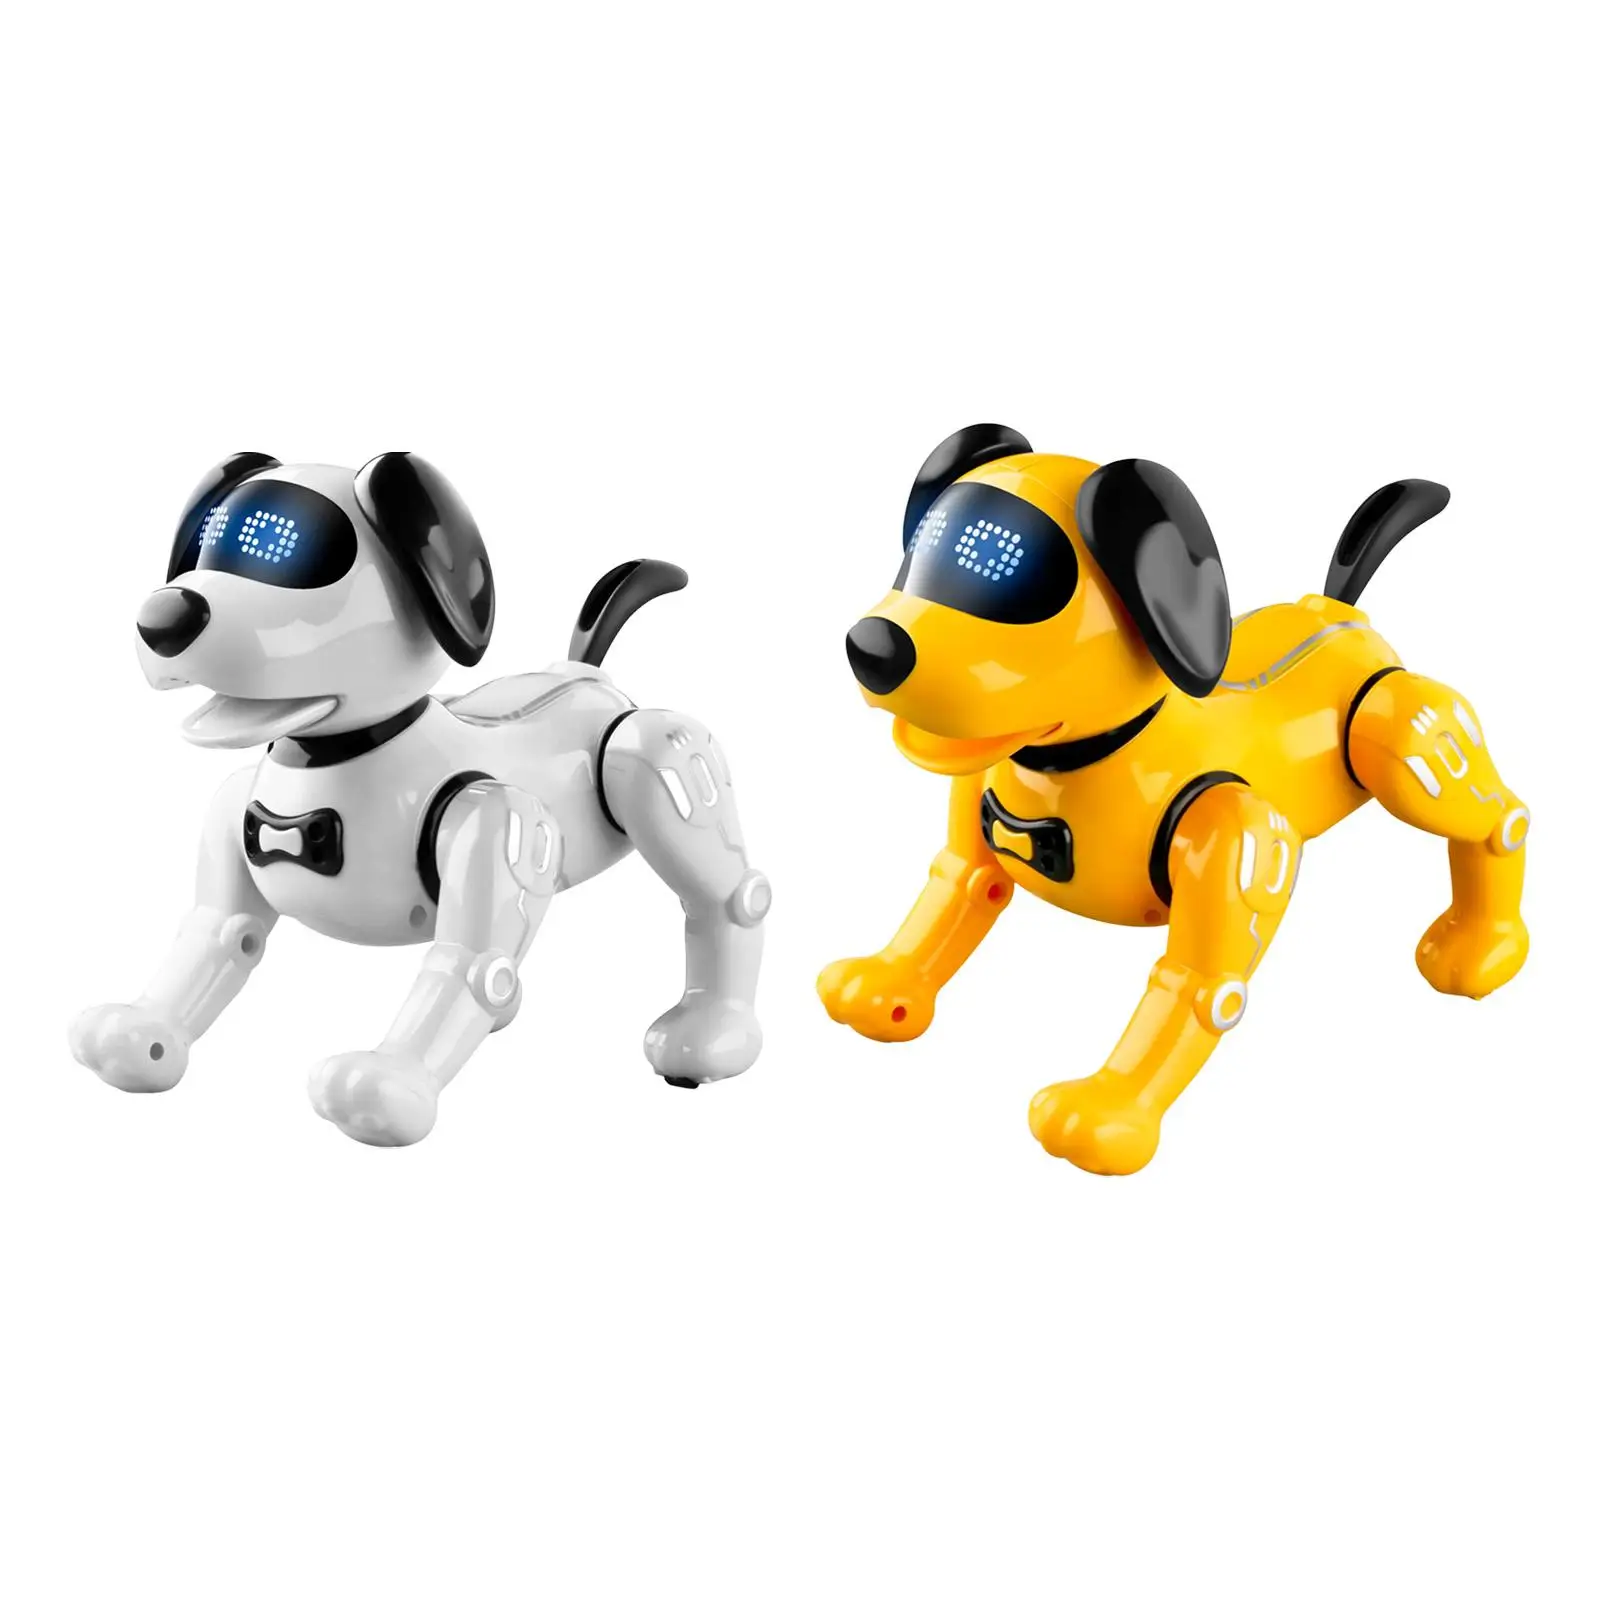 Remote Control Robot Dog Toy Push up Pet Dog Robot interactive Robotic Pet Stunt Puppy for Boys and Girls Age 5 6 7 8 9 10